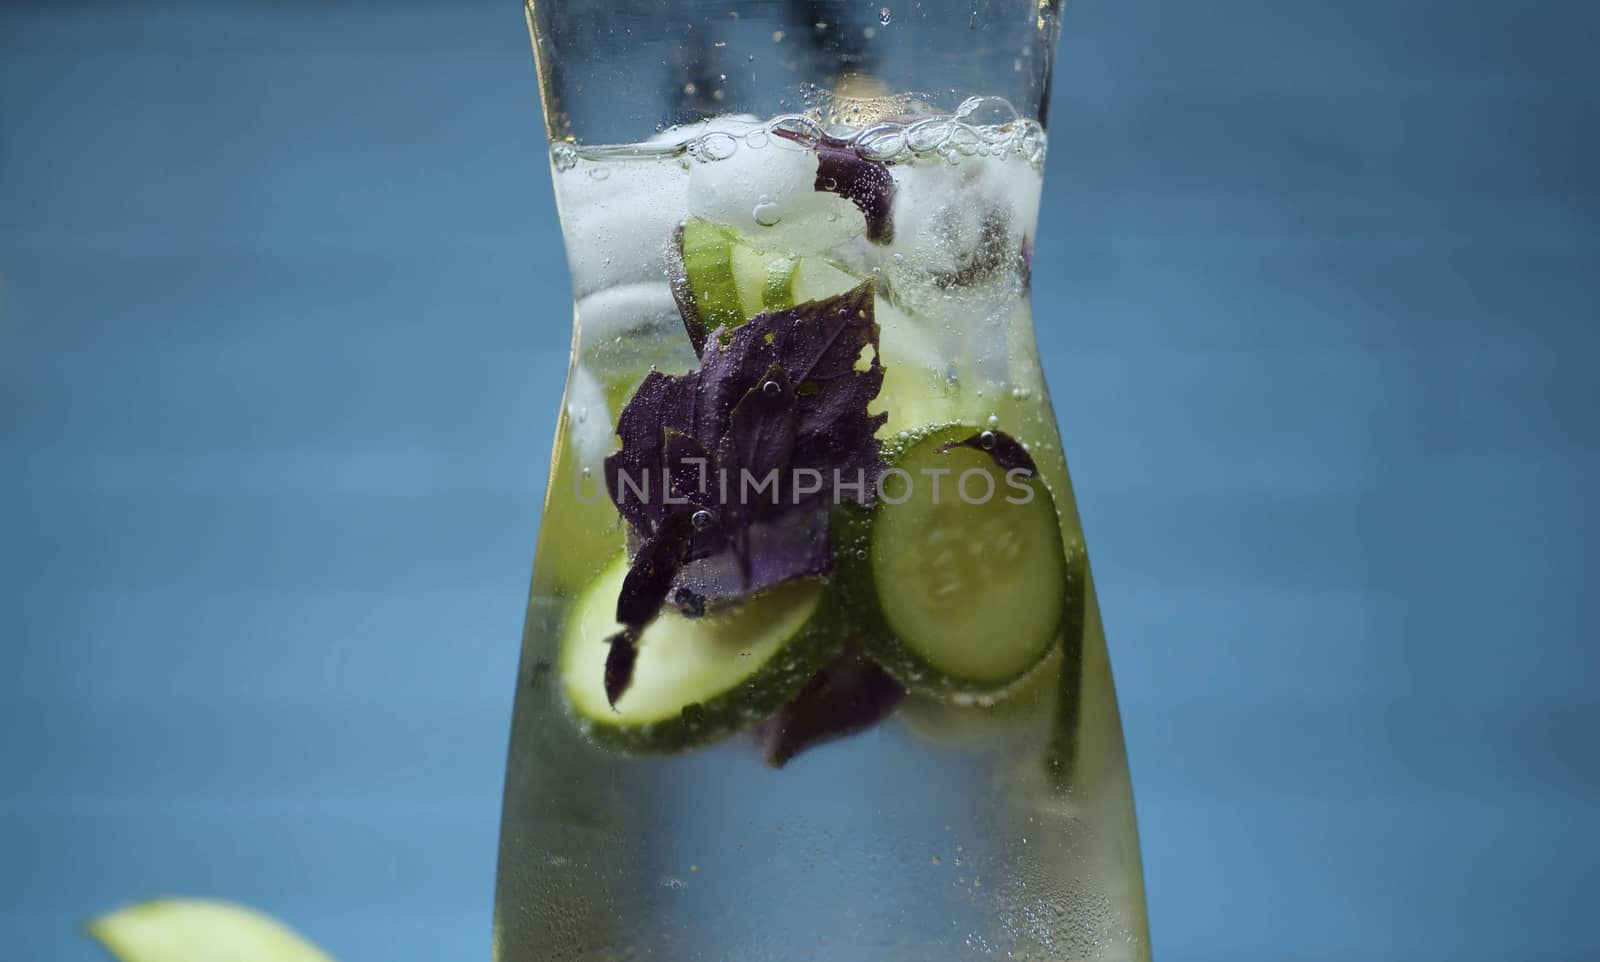 Close up vegetable fizzy drink. Sparkling water in a glass jug with sliced cucumber and purple basil leaves. Blurry bulbs on blue background